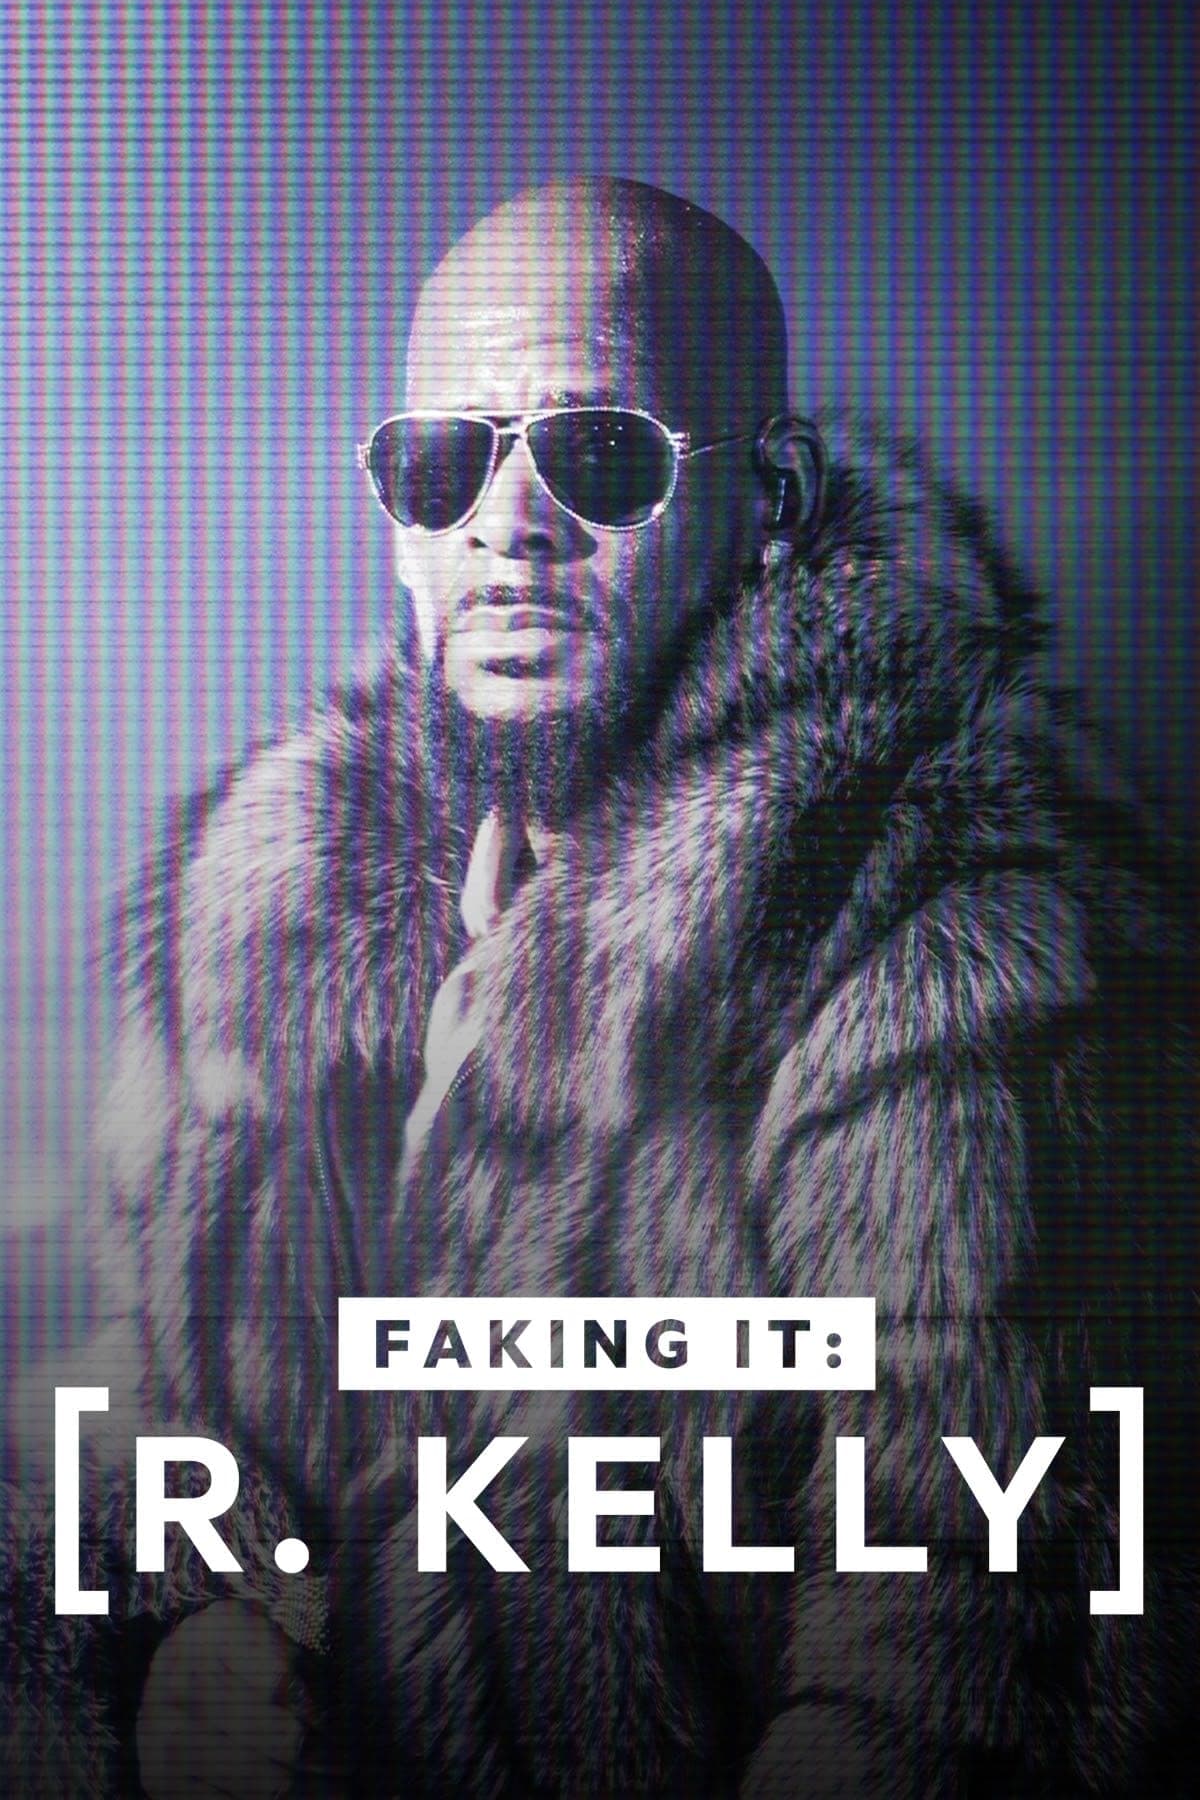 R. Kelly: A Faking It Special